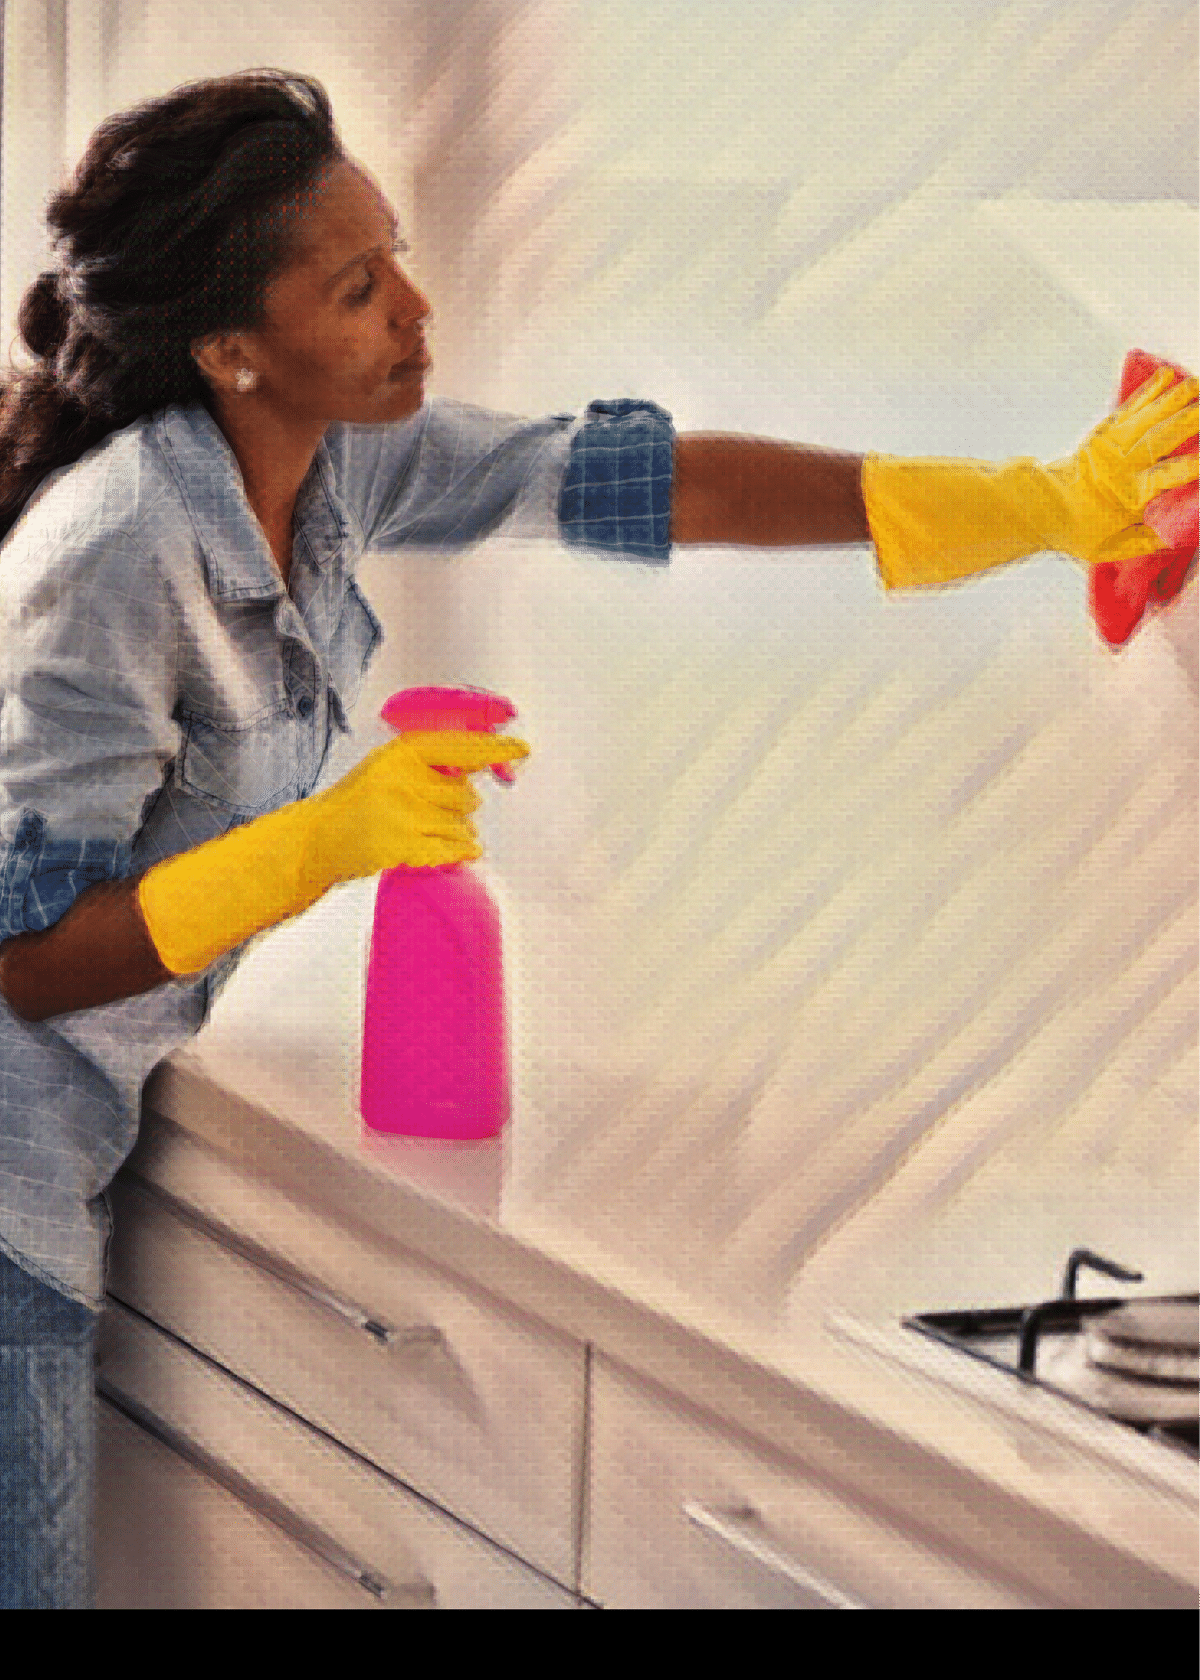 Best Steam Cleaner For Grout